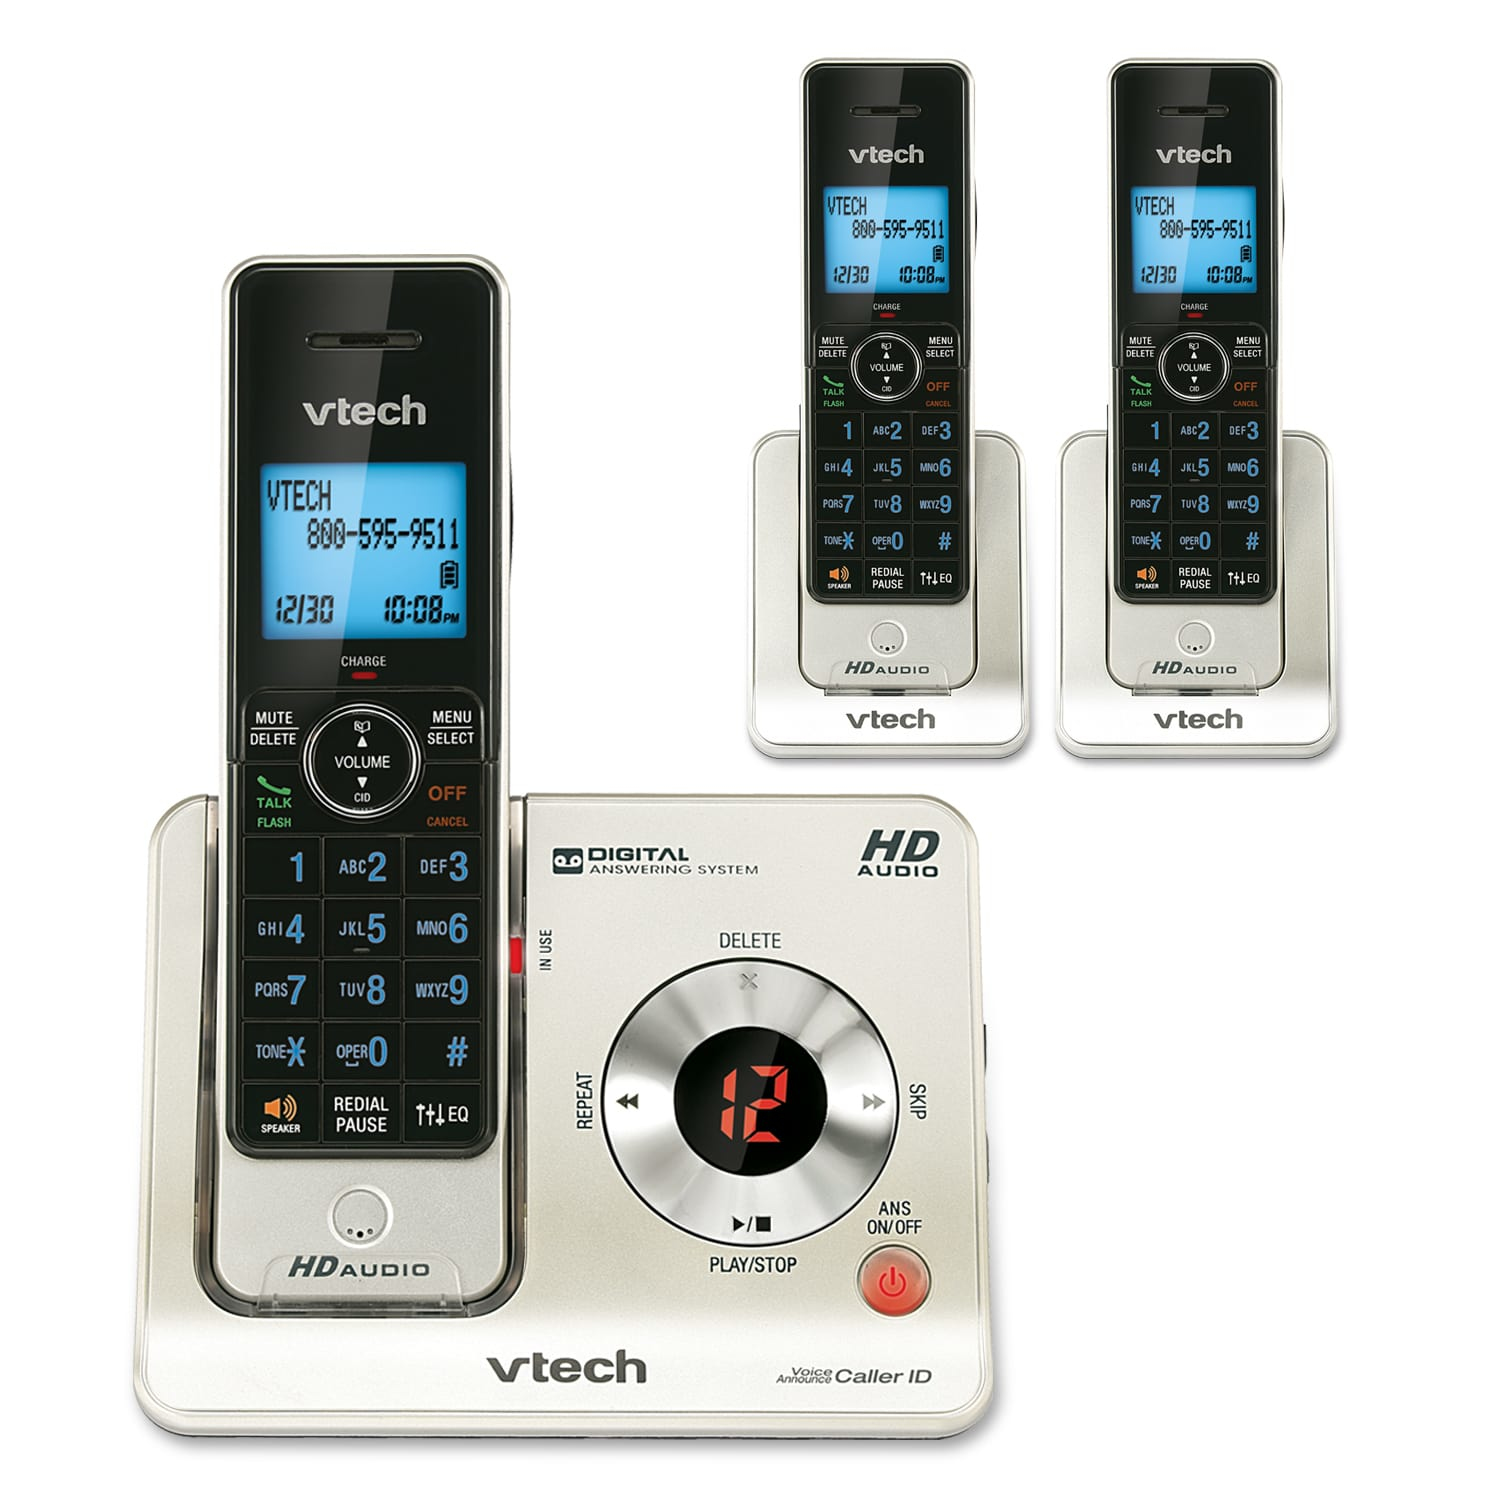 3 HANDSET CORDLESS ANSWER SYS